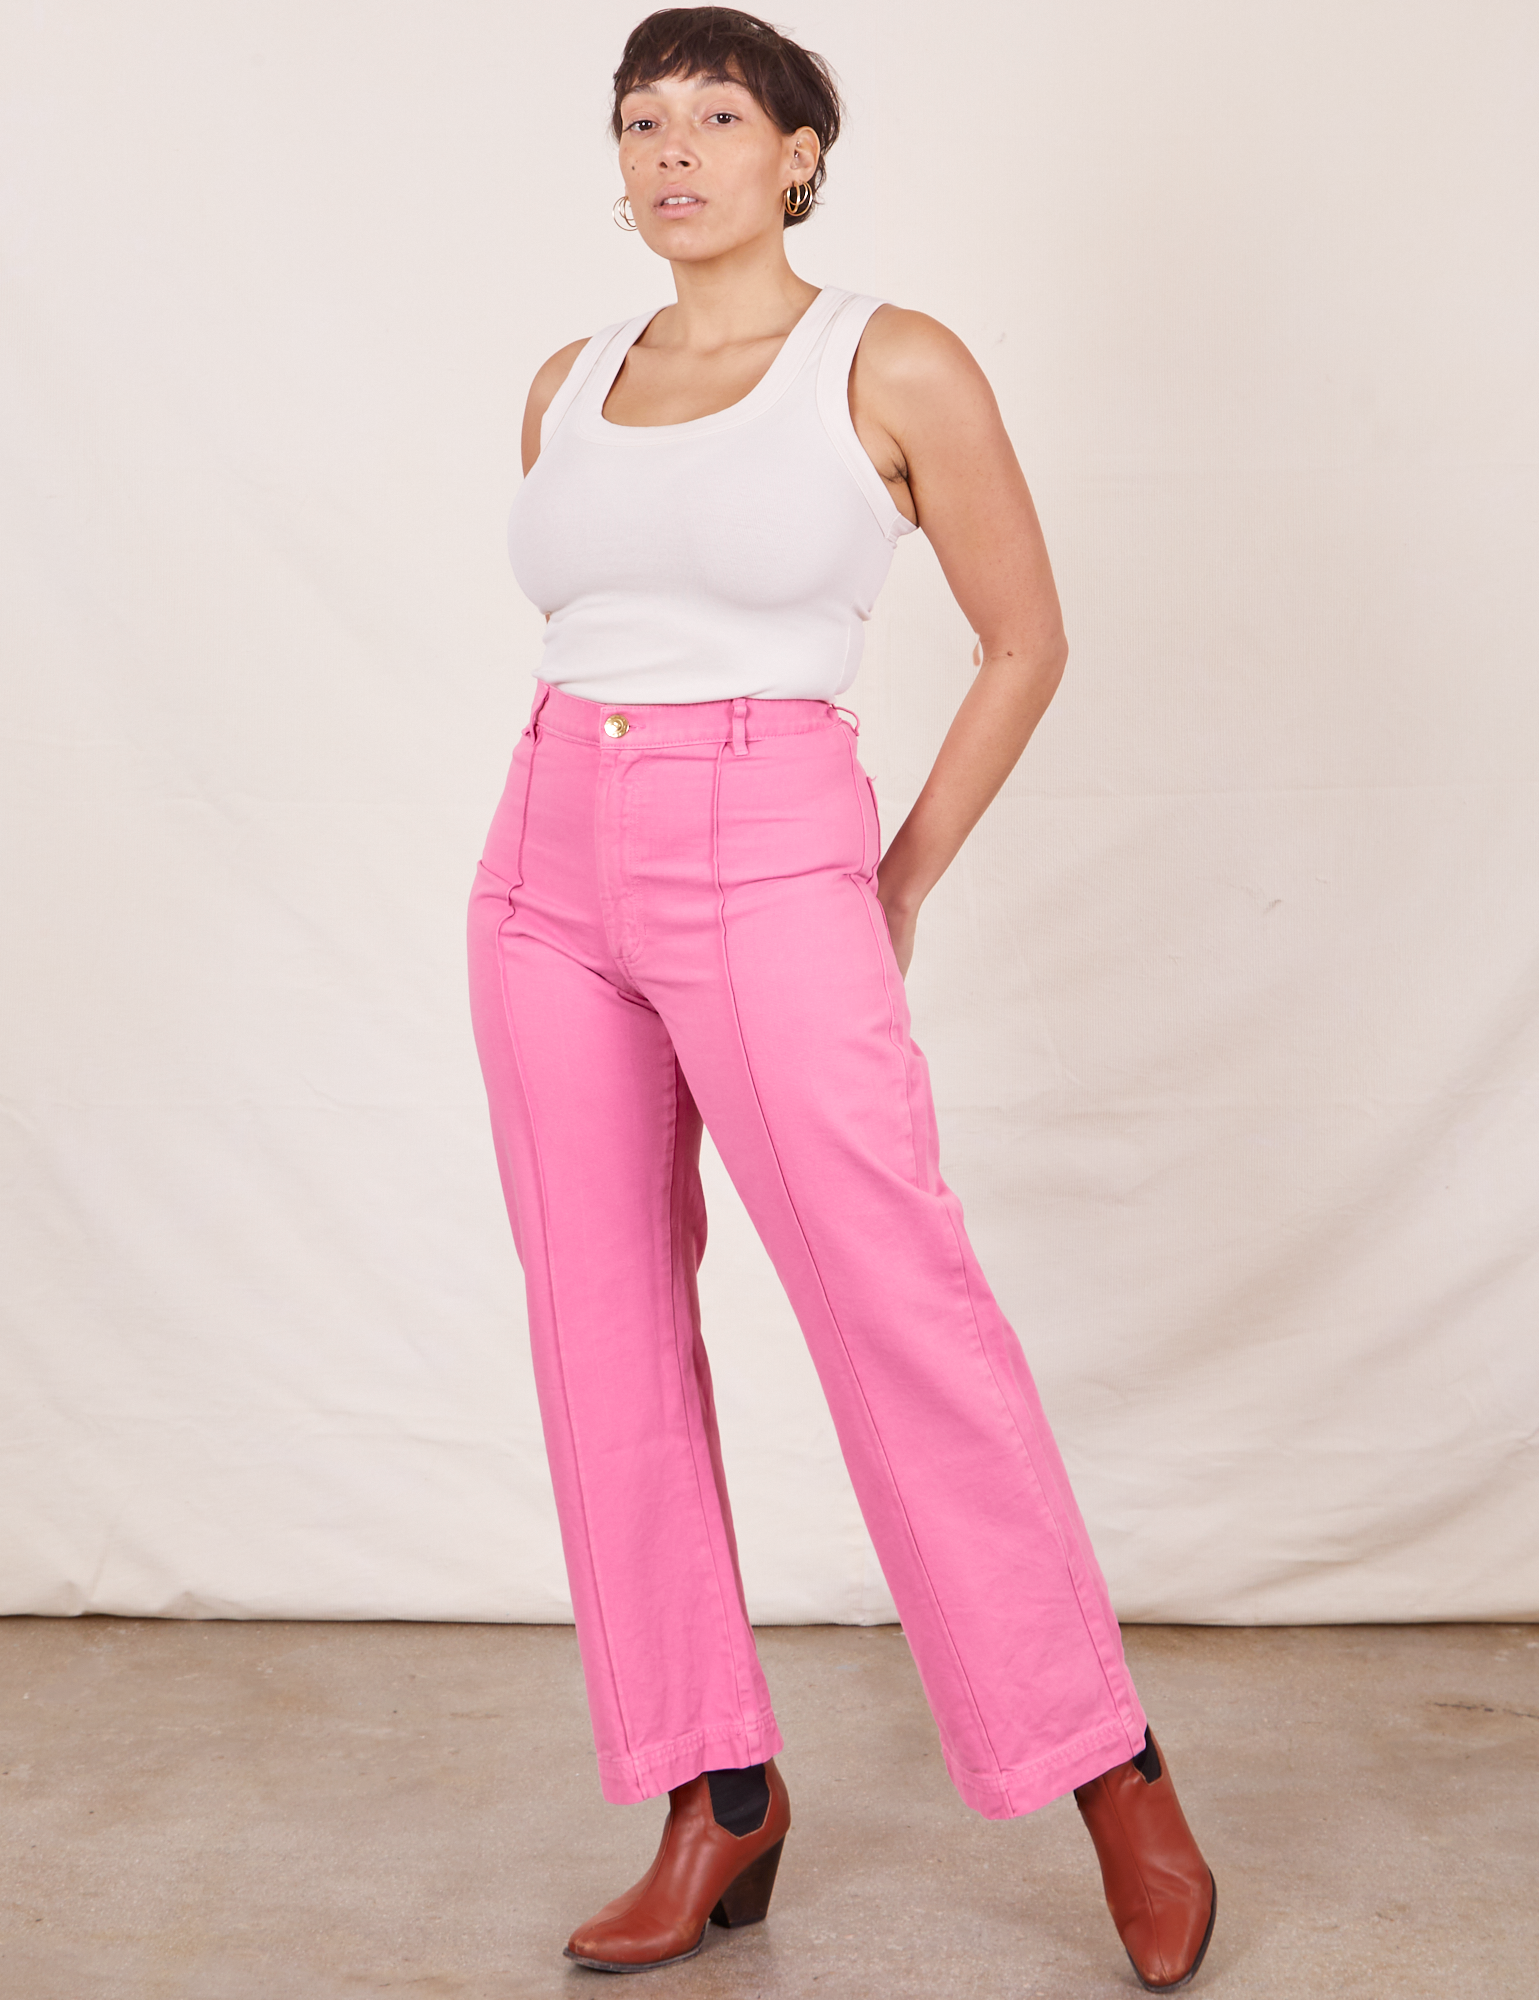 Tiara is 5&#39;4&quot; and wearing S Western Pants in Bubblegum Pink paired with vintage off-white Tank Top